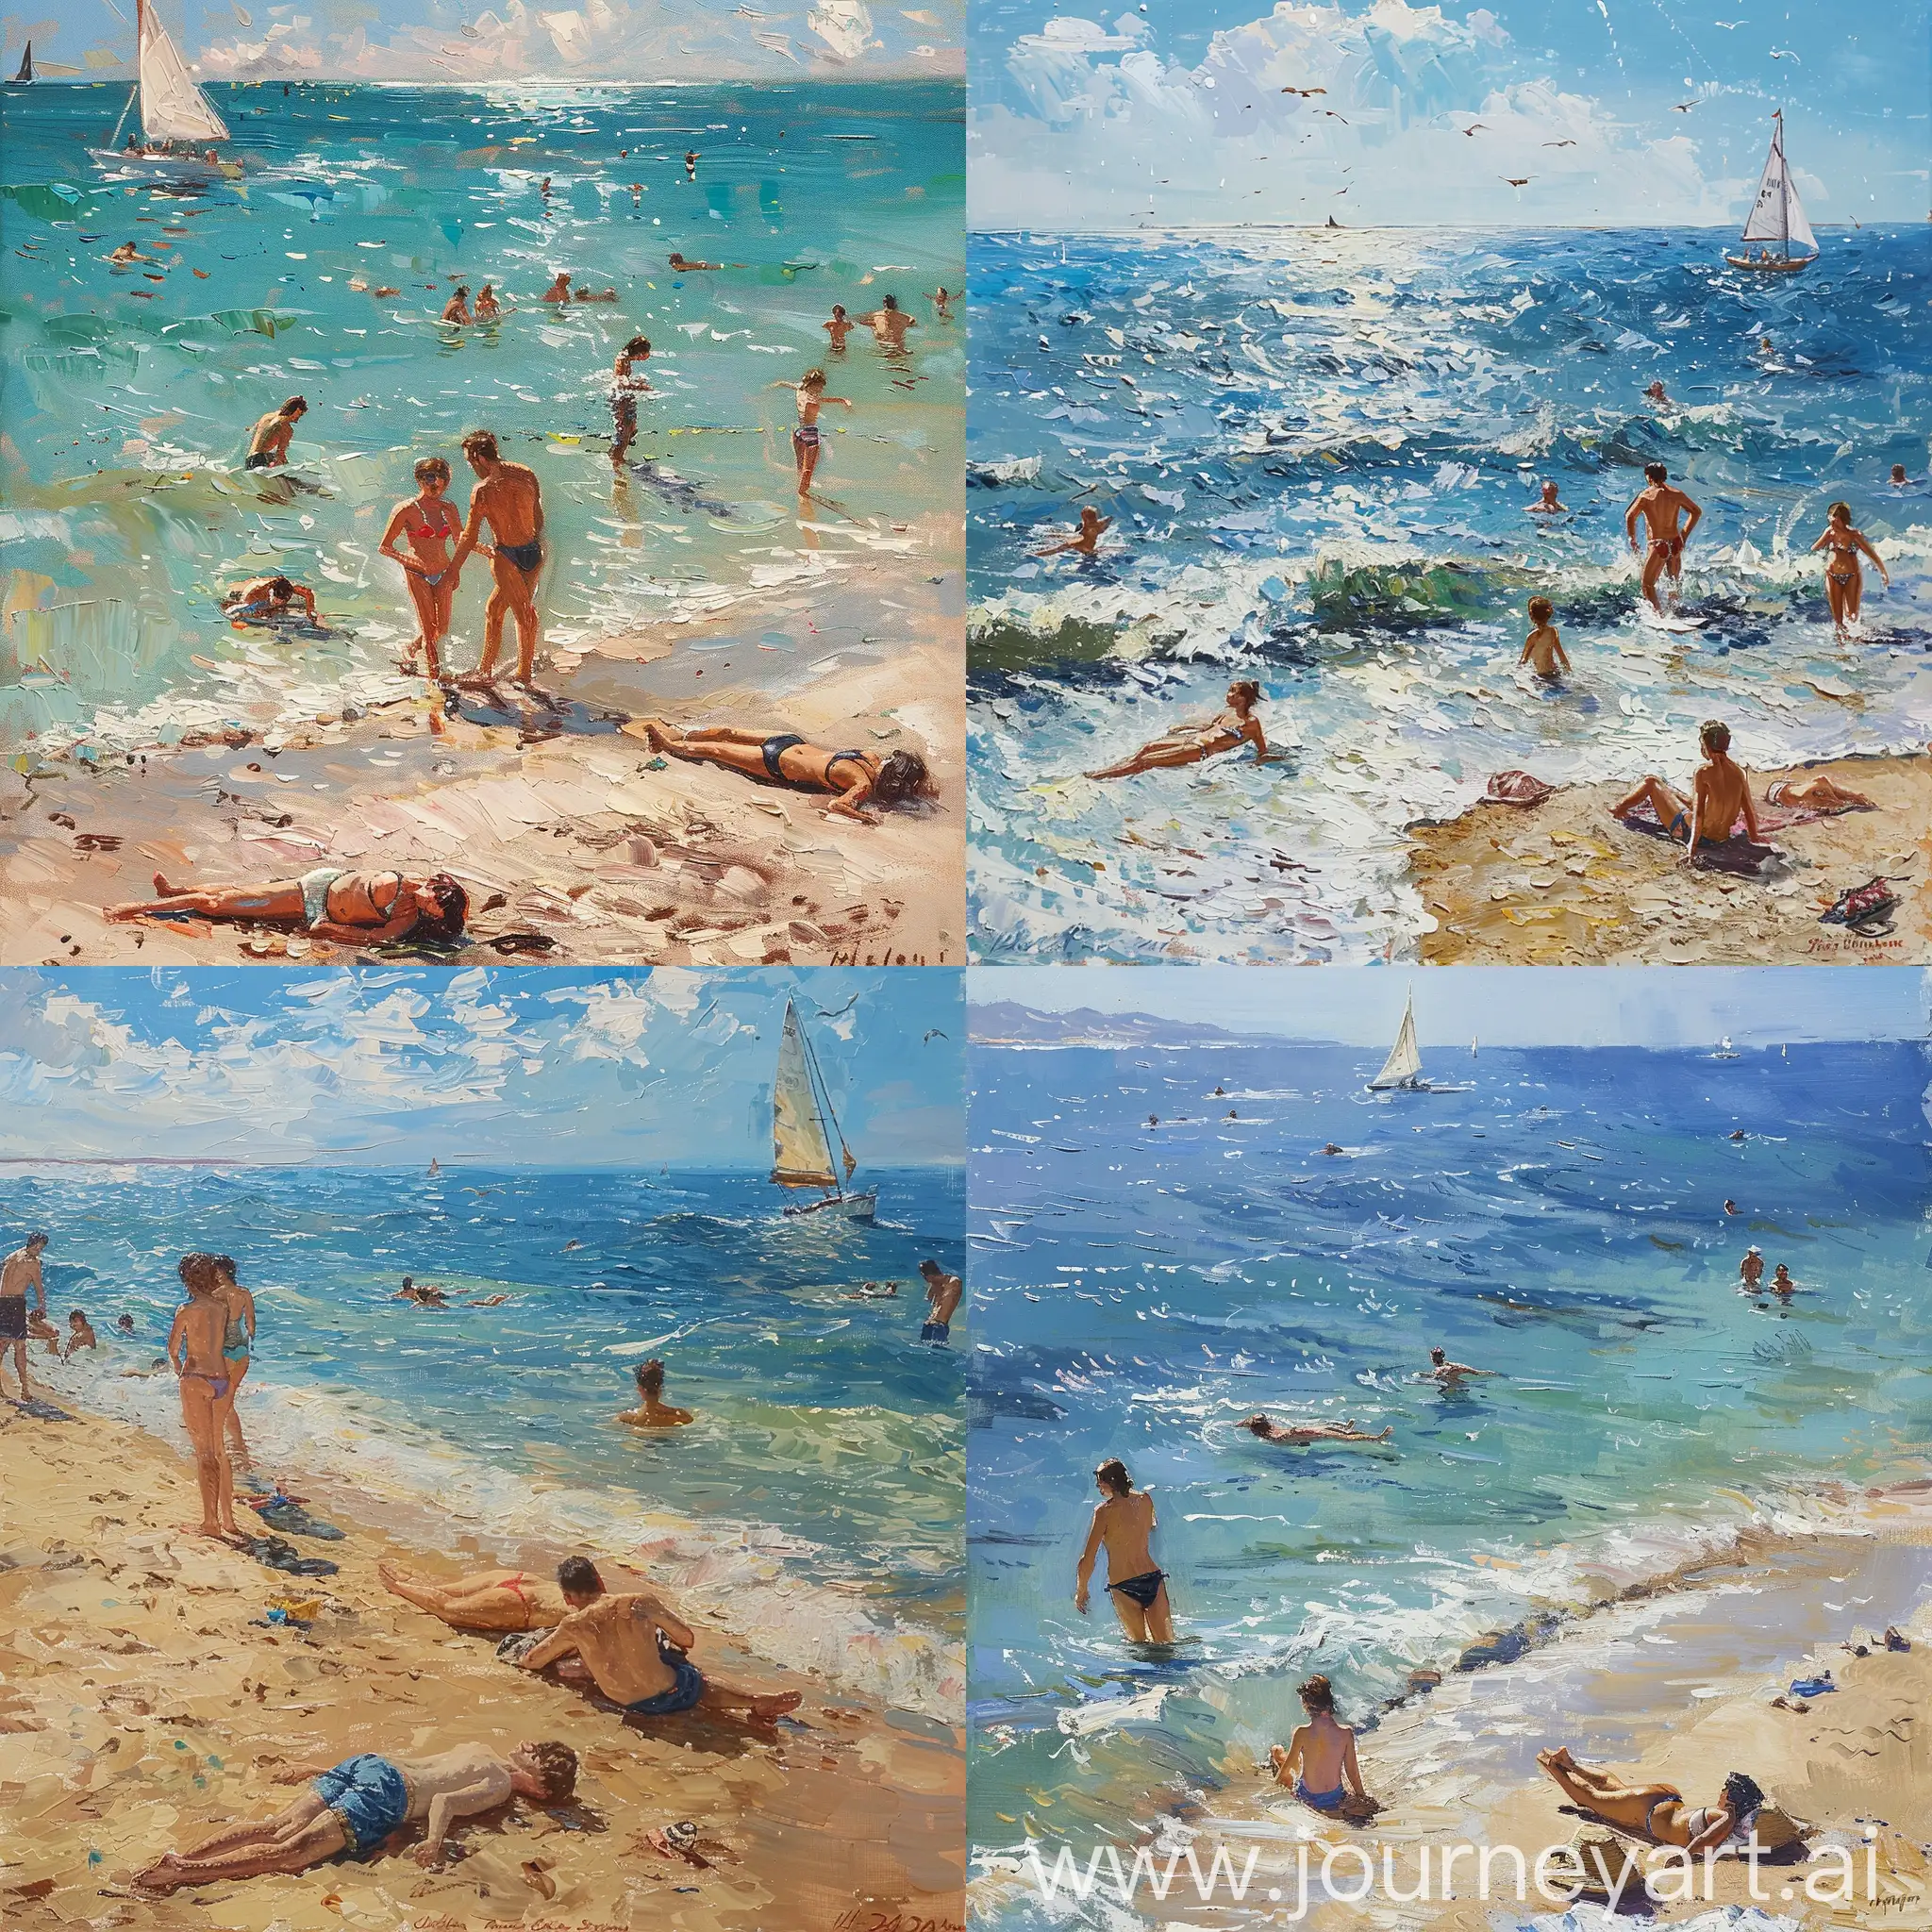 Oil painting, sea, sunny day, several people are swimming in the water, a couple is lying on the sand, there are few people on the beach, a sailboat is seen in the distance in the sea, a beautiful seascape